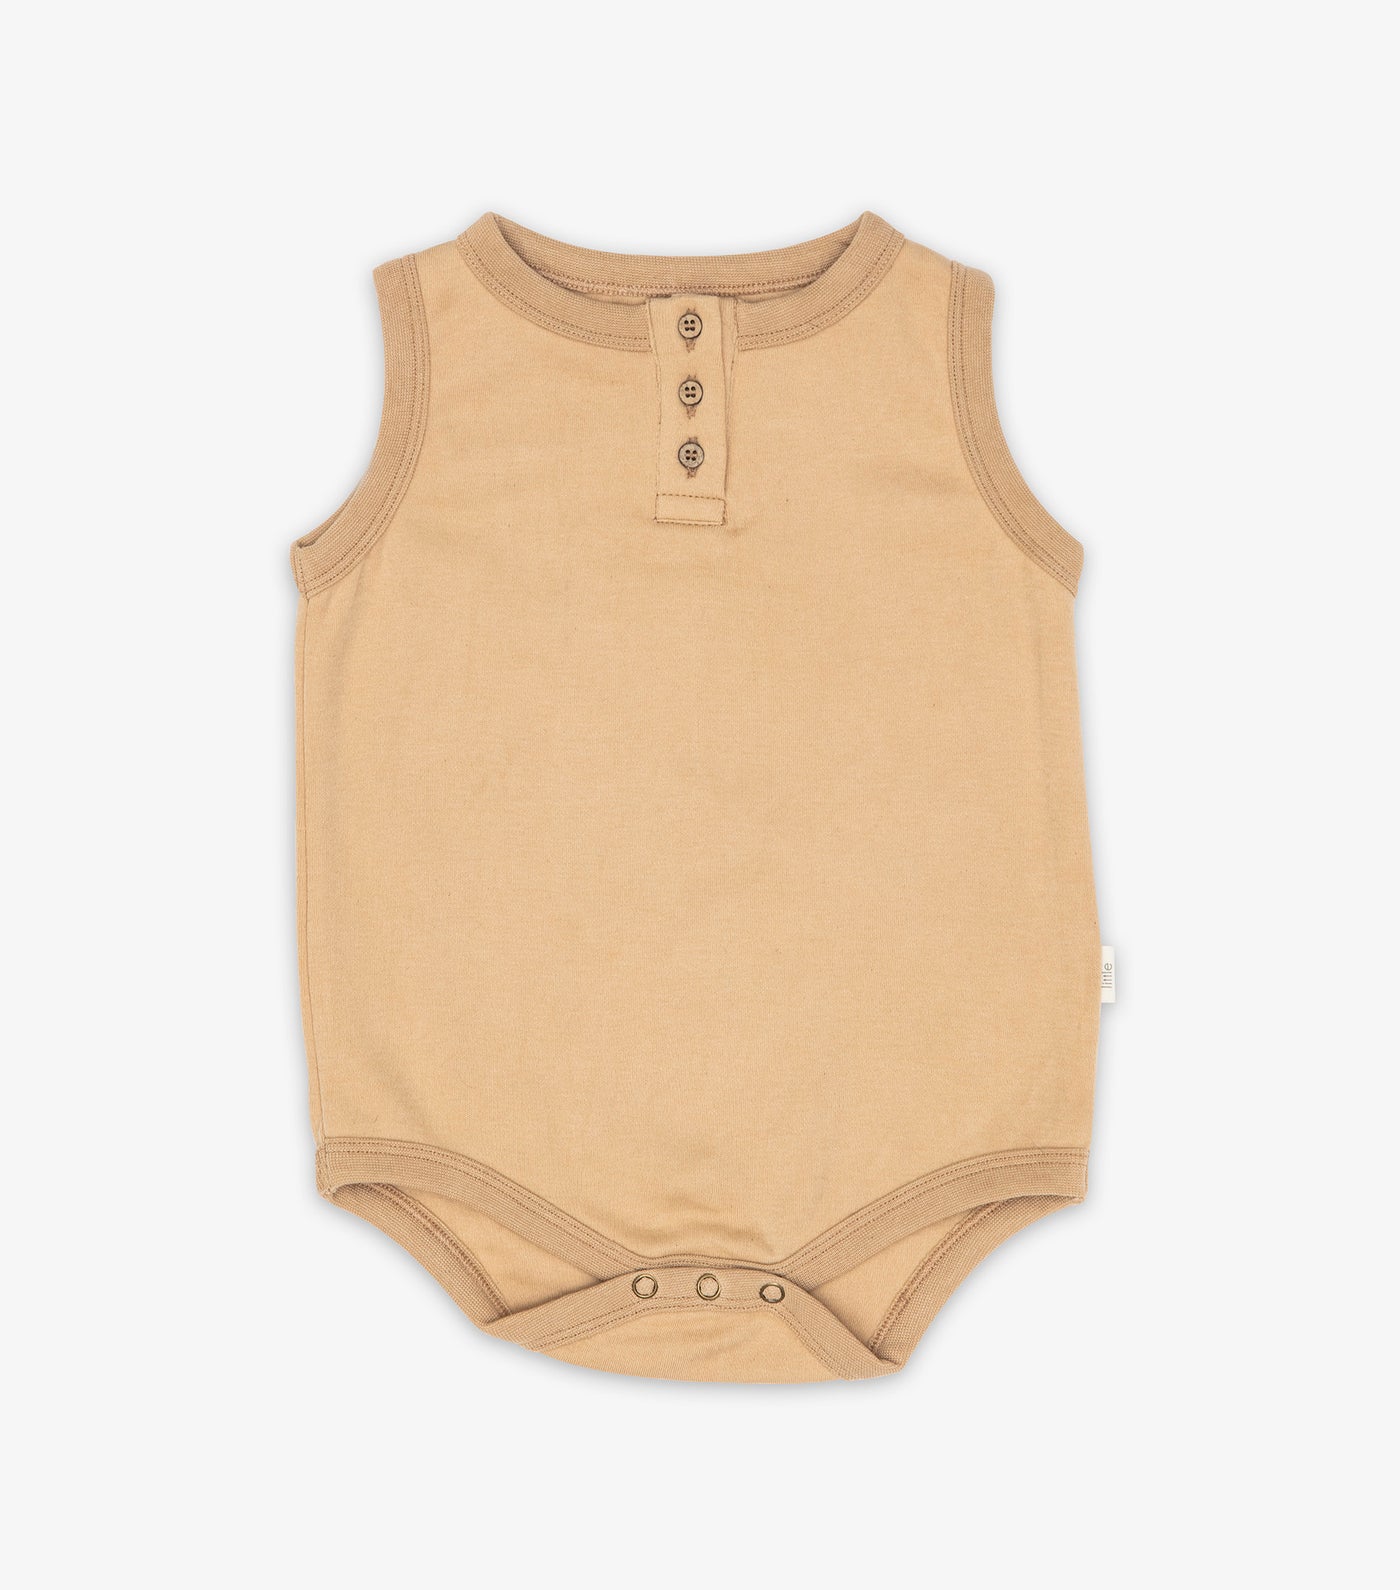 Last Chance Baby Singlet Onesie With Buttons - Warm Sand